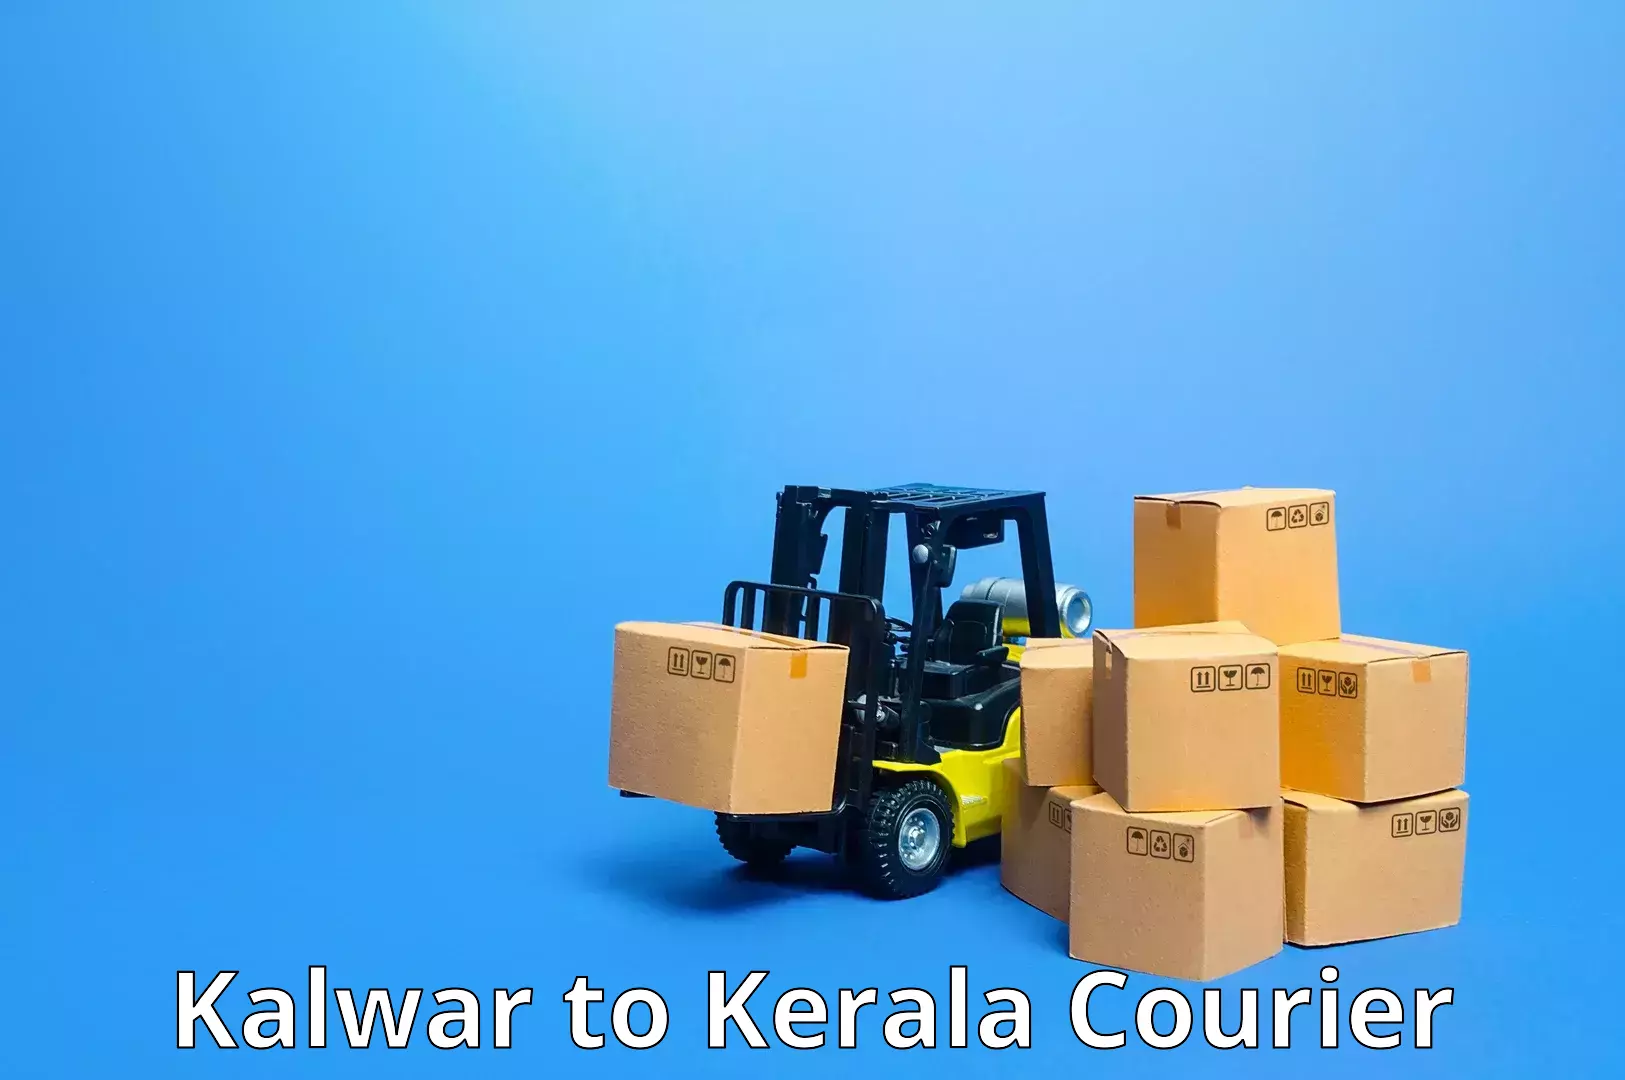 Large-scale shipping solutions Kalwar to Kerala